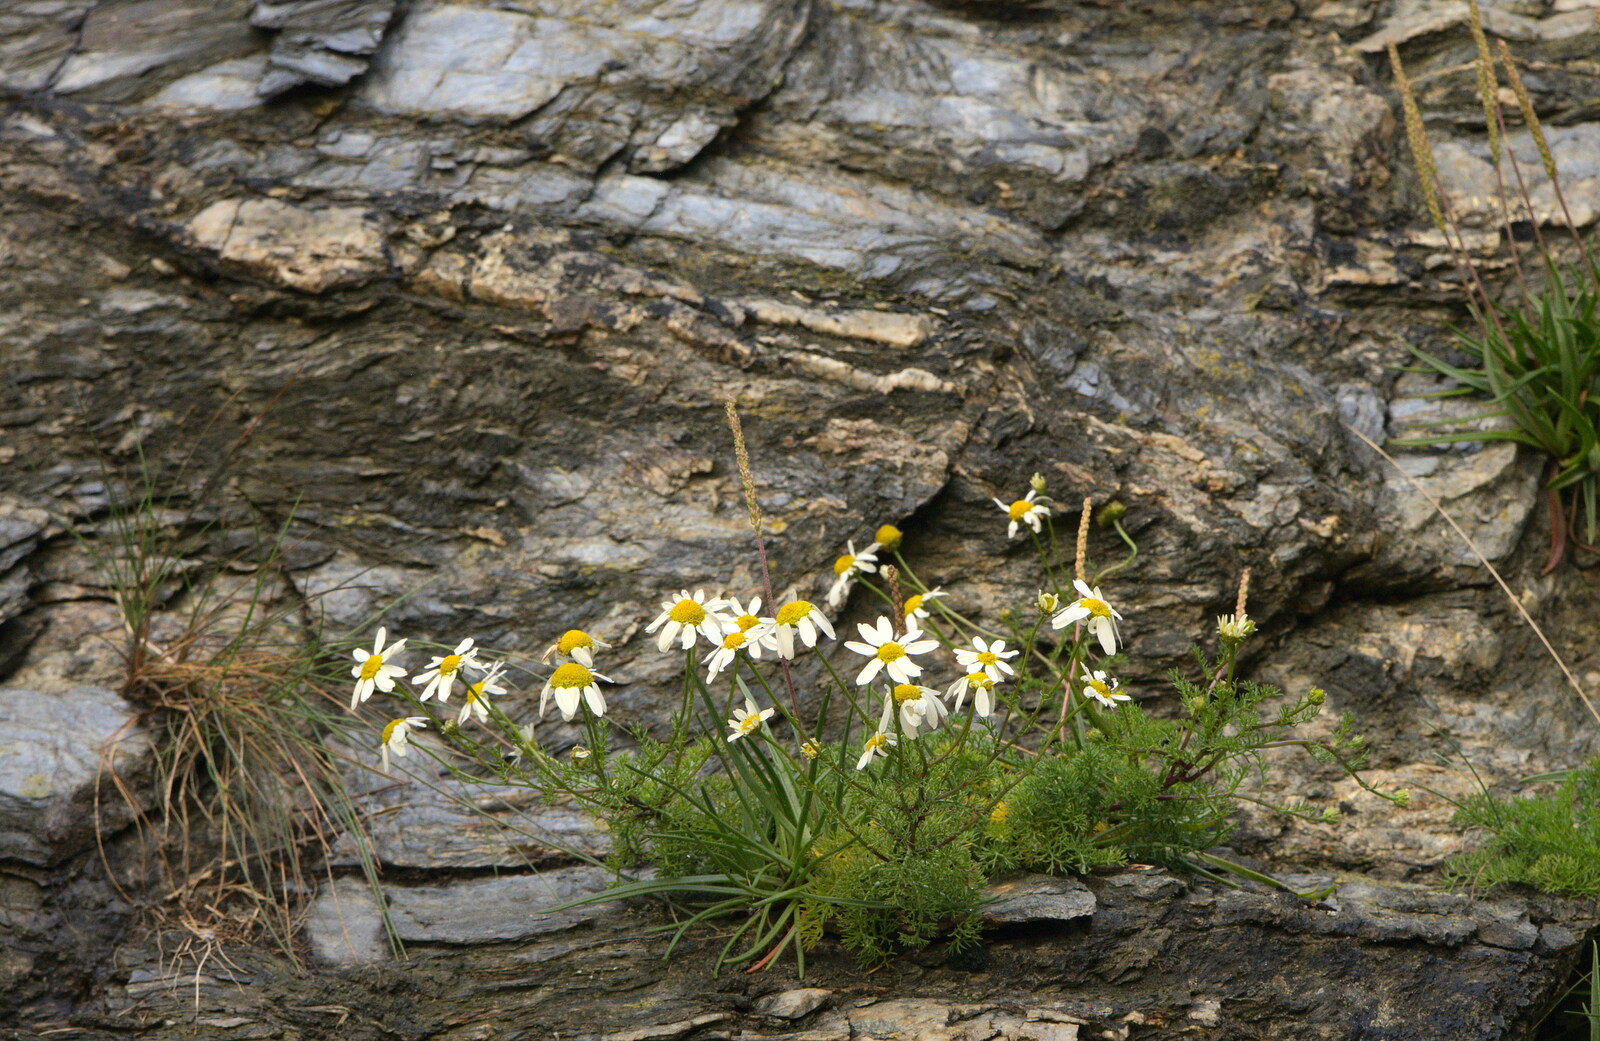 Daisies in the cliff from Camping at Silver Strand, Wicklow, County Wicklow, Ireland - 7th August 2014